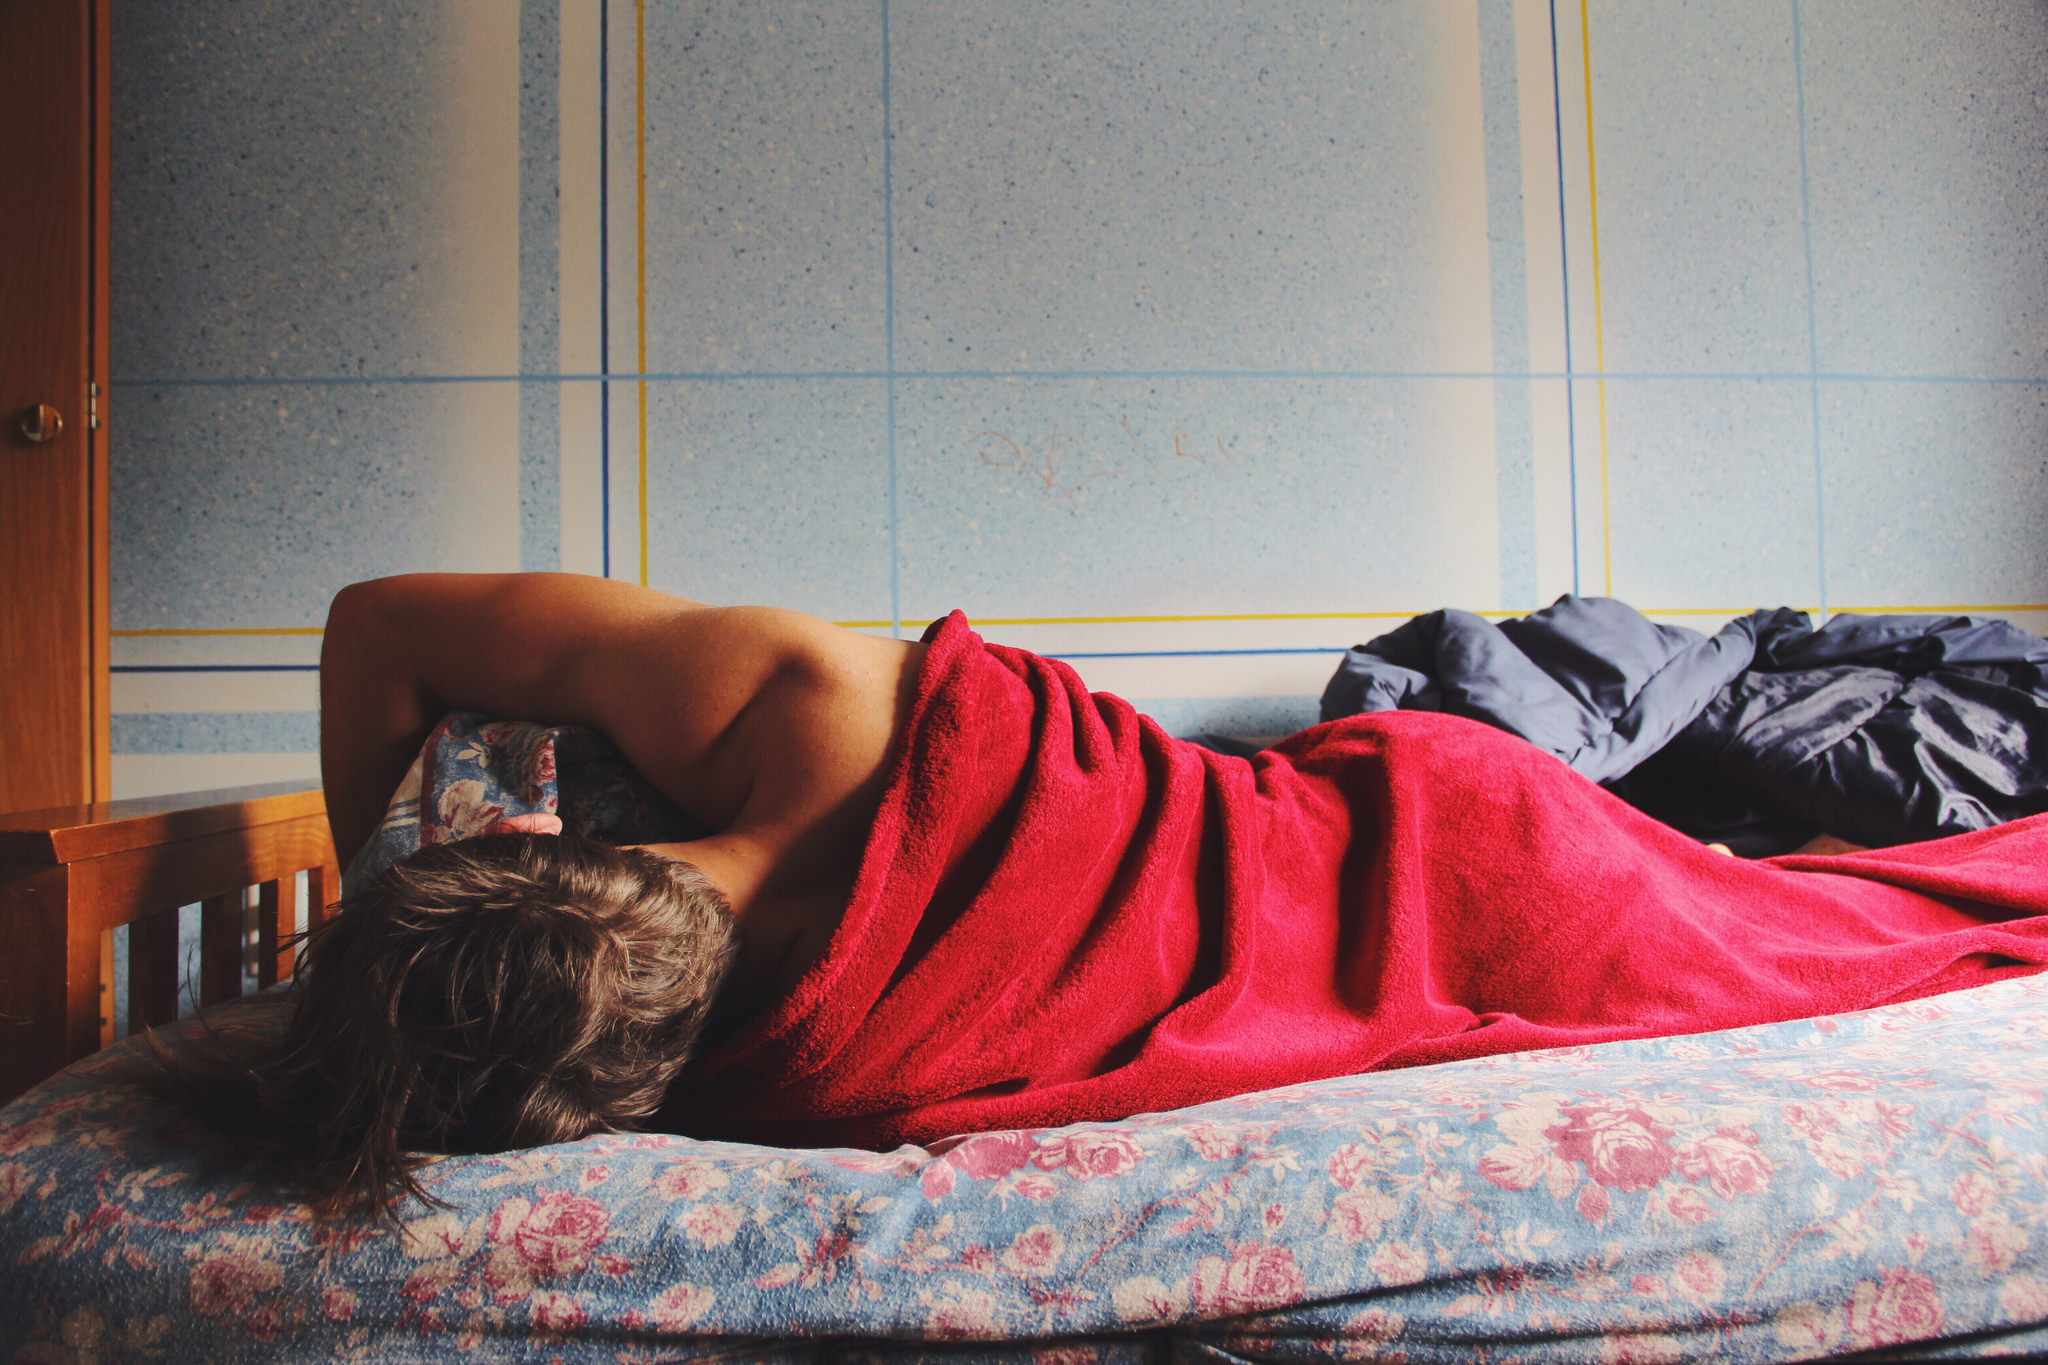 16 Insanely Hot Ways To Wake Him Up With An Orgasm Thought Catalog image